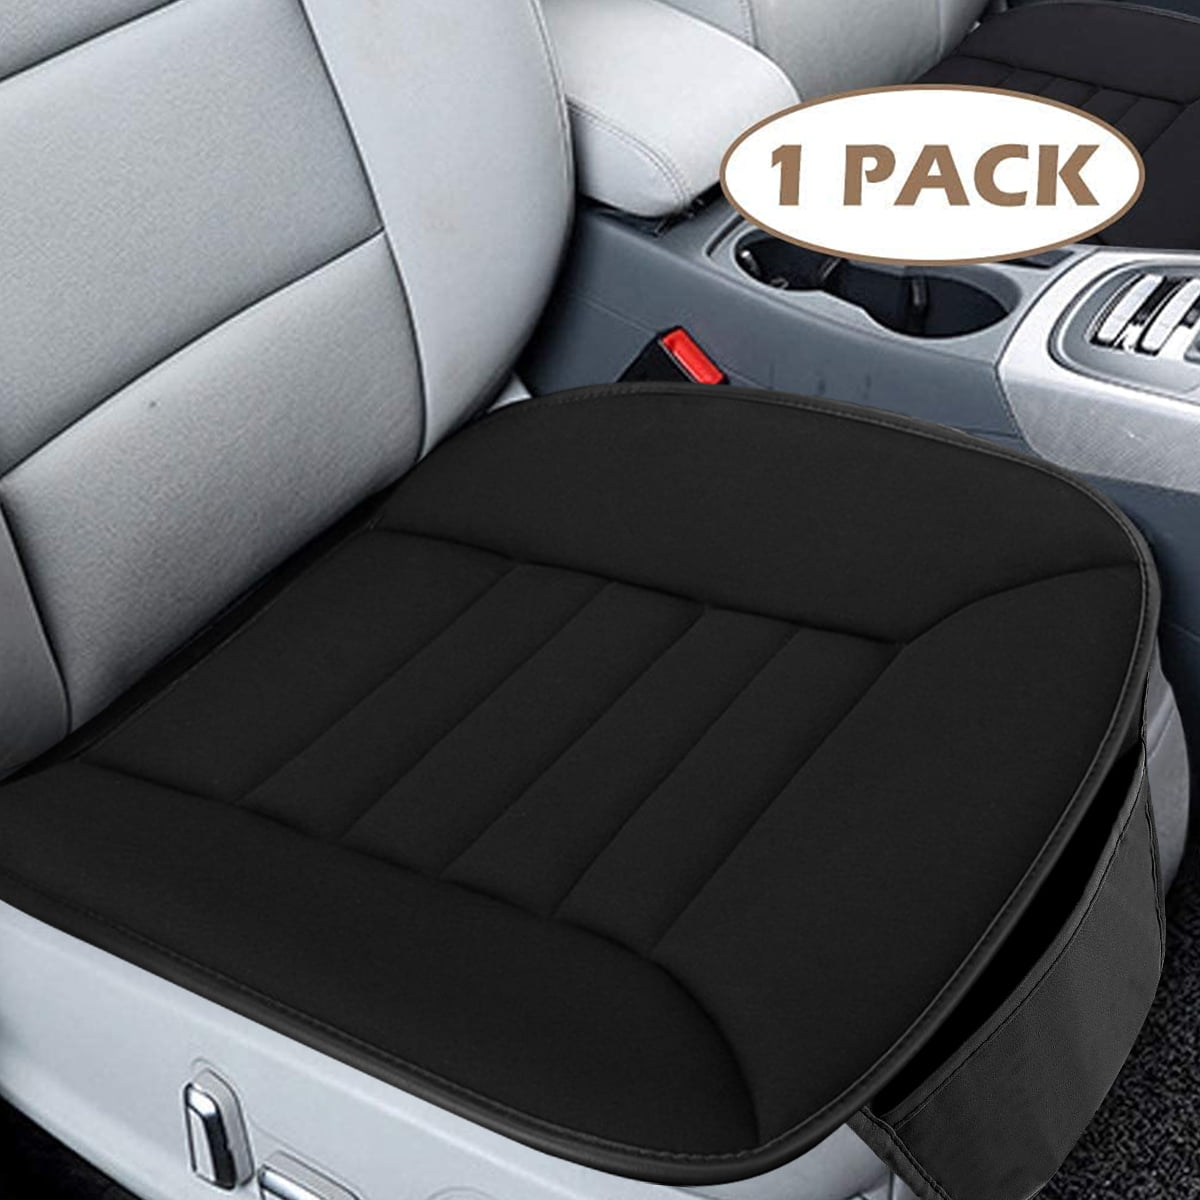 Car Cushion Wedge Seat Cushions Thickened Butt Pad With Ergonomic